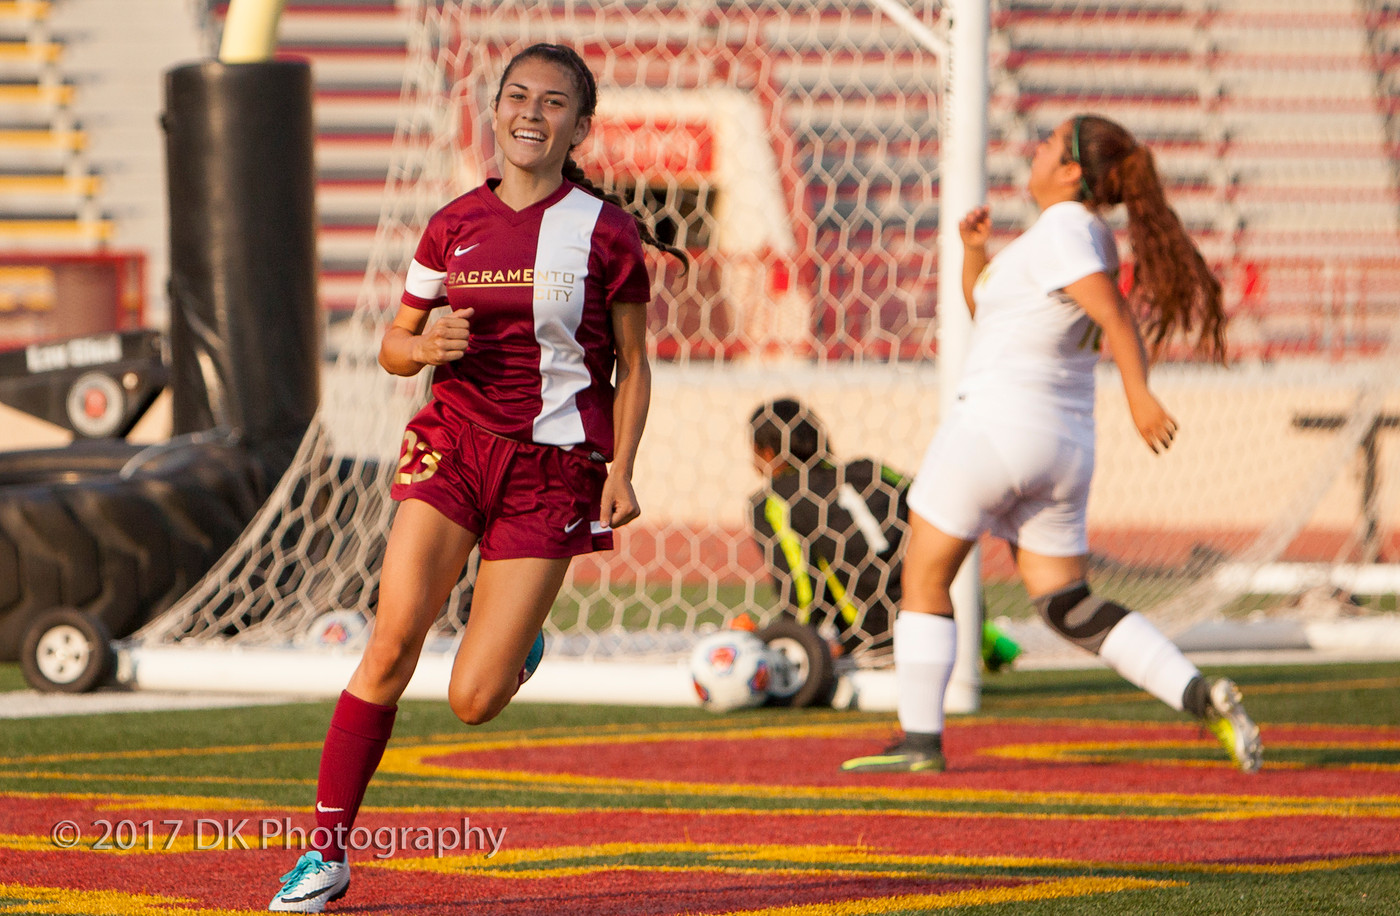 Arianna Gonzalez leads the Panthers with two goals as they get the 4-1 victory over Napa Valley